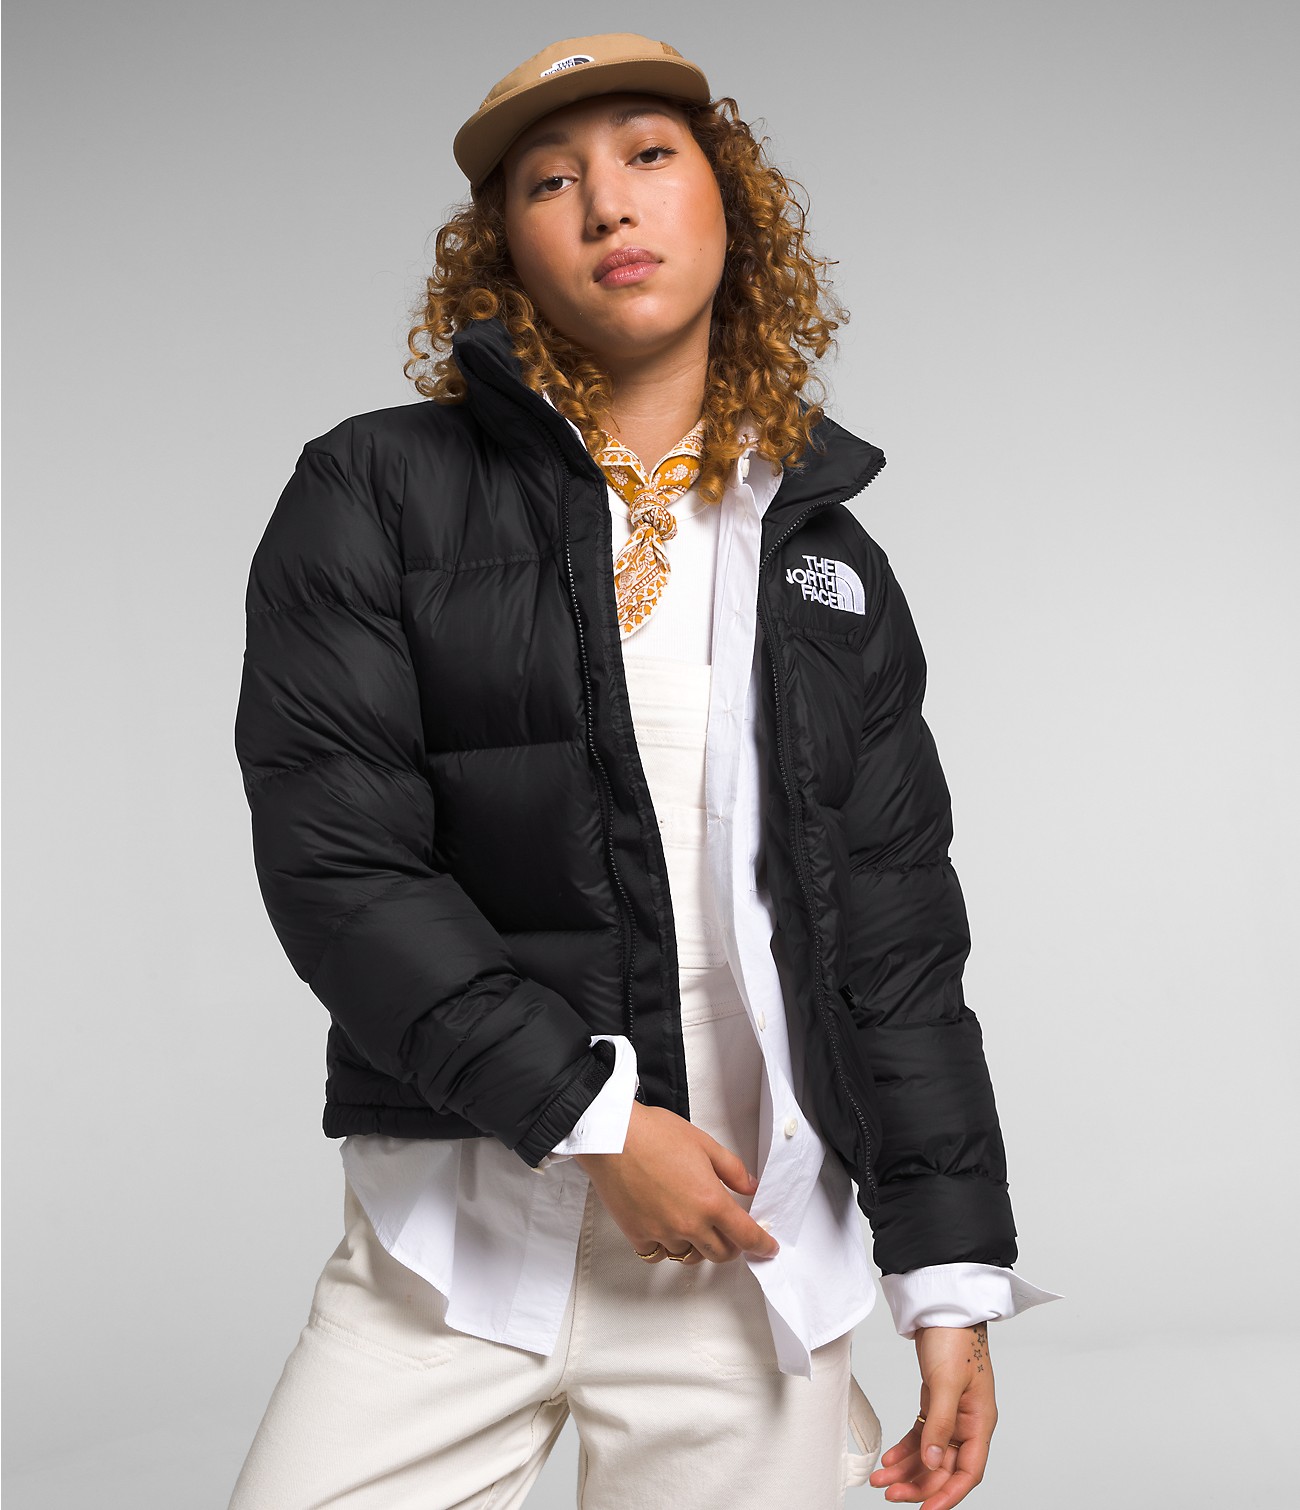 Unlock Wilderness' choice in the Canada Goose Vs North Face comparison, the 1996 Retro Nuptse Jacket by The North Face